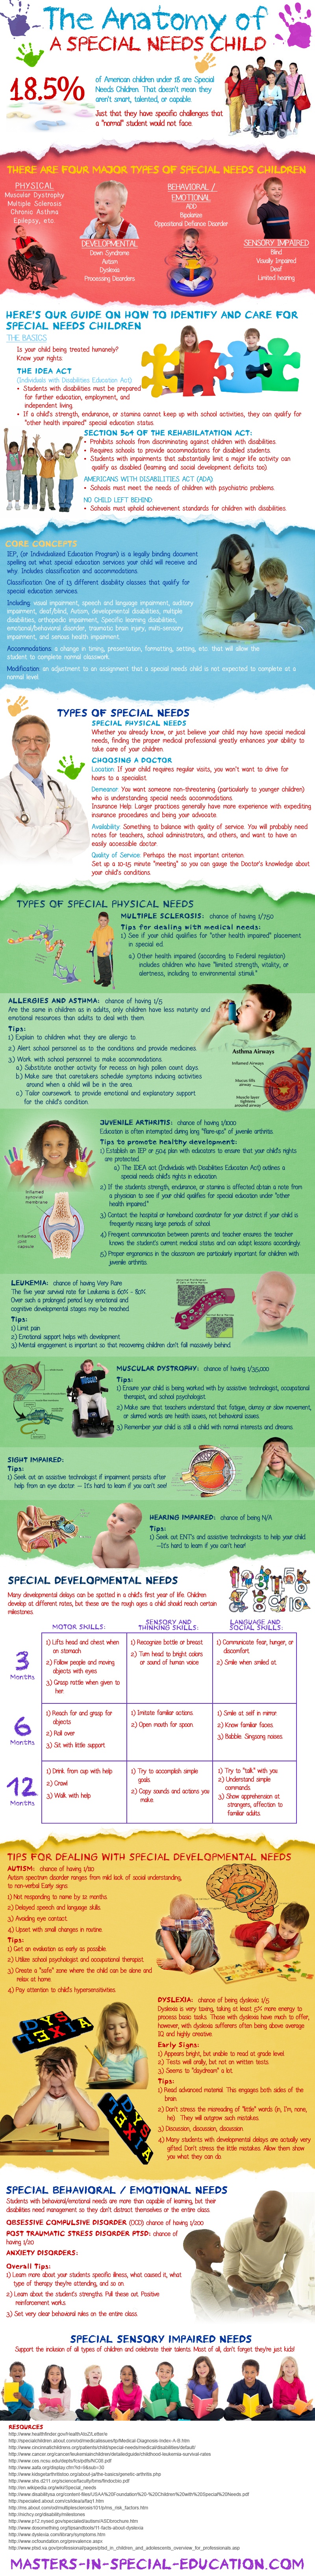 Anatomy of a Special Needs Child Infographic